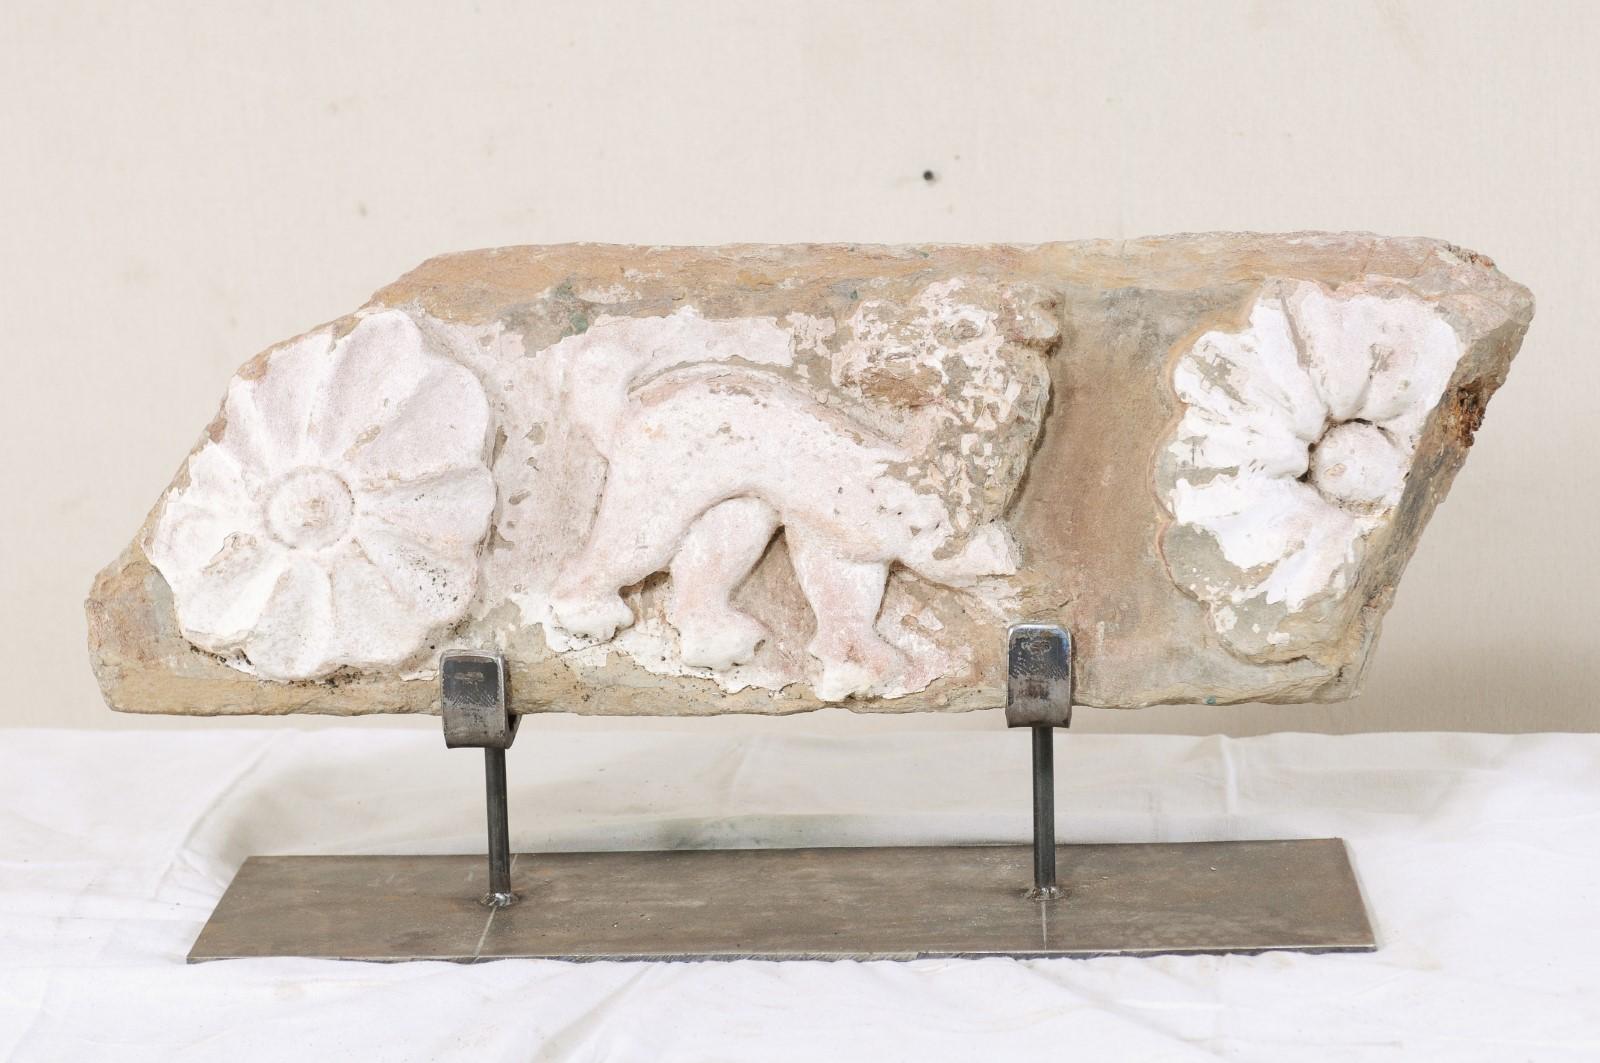 An exquisite 18th century Spanish carved-stone fragment, with mythological creature and flowers, on custom iron stand. This antique fragment from Spain features a horizontally set stone which has been hand carved with a mythological creature,